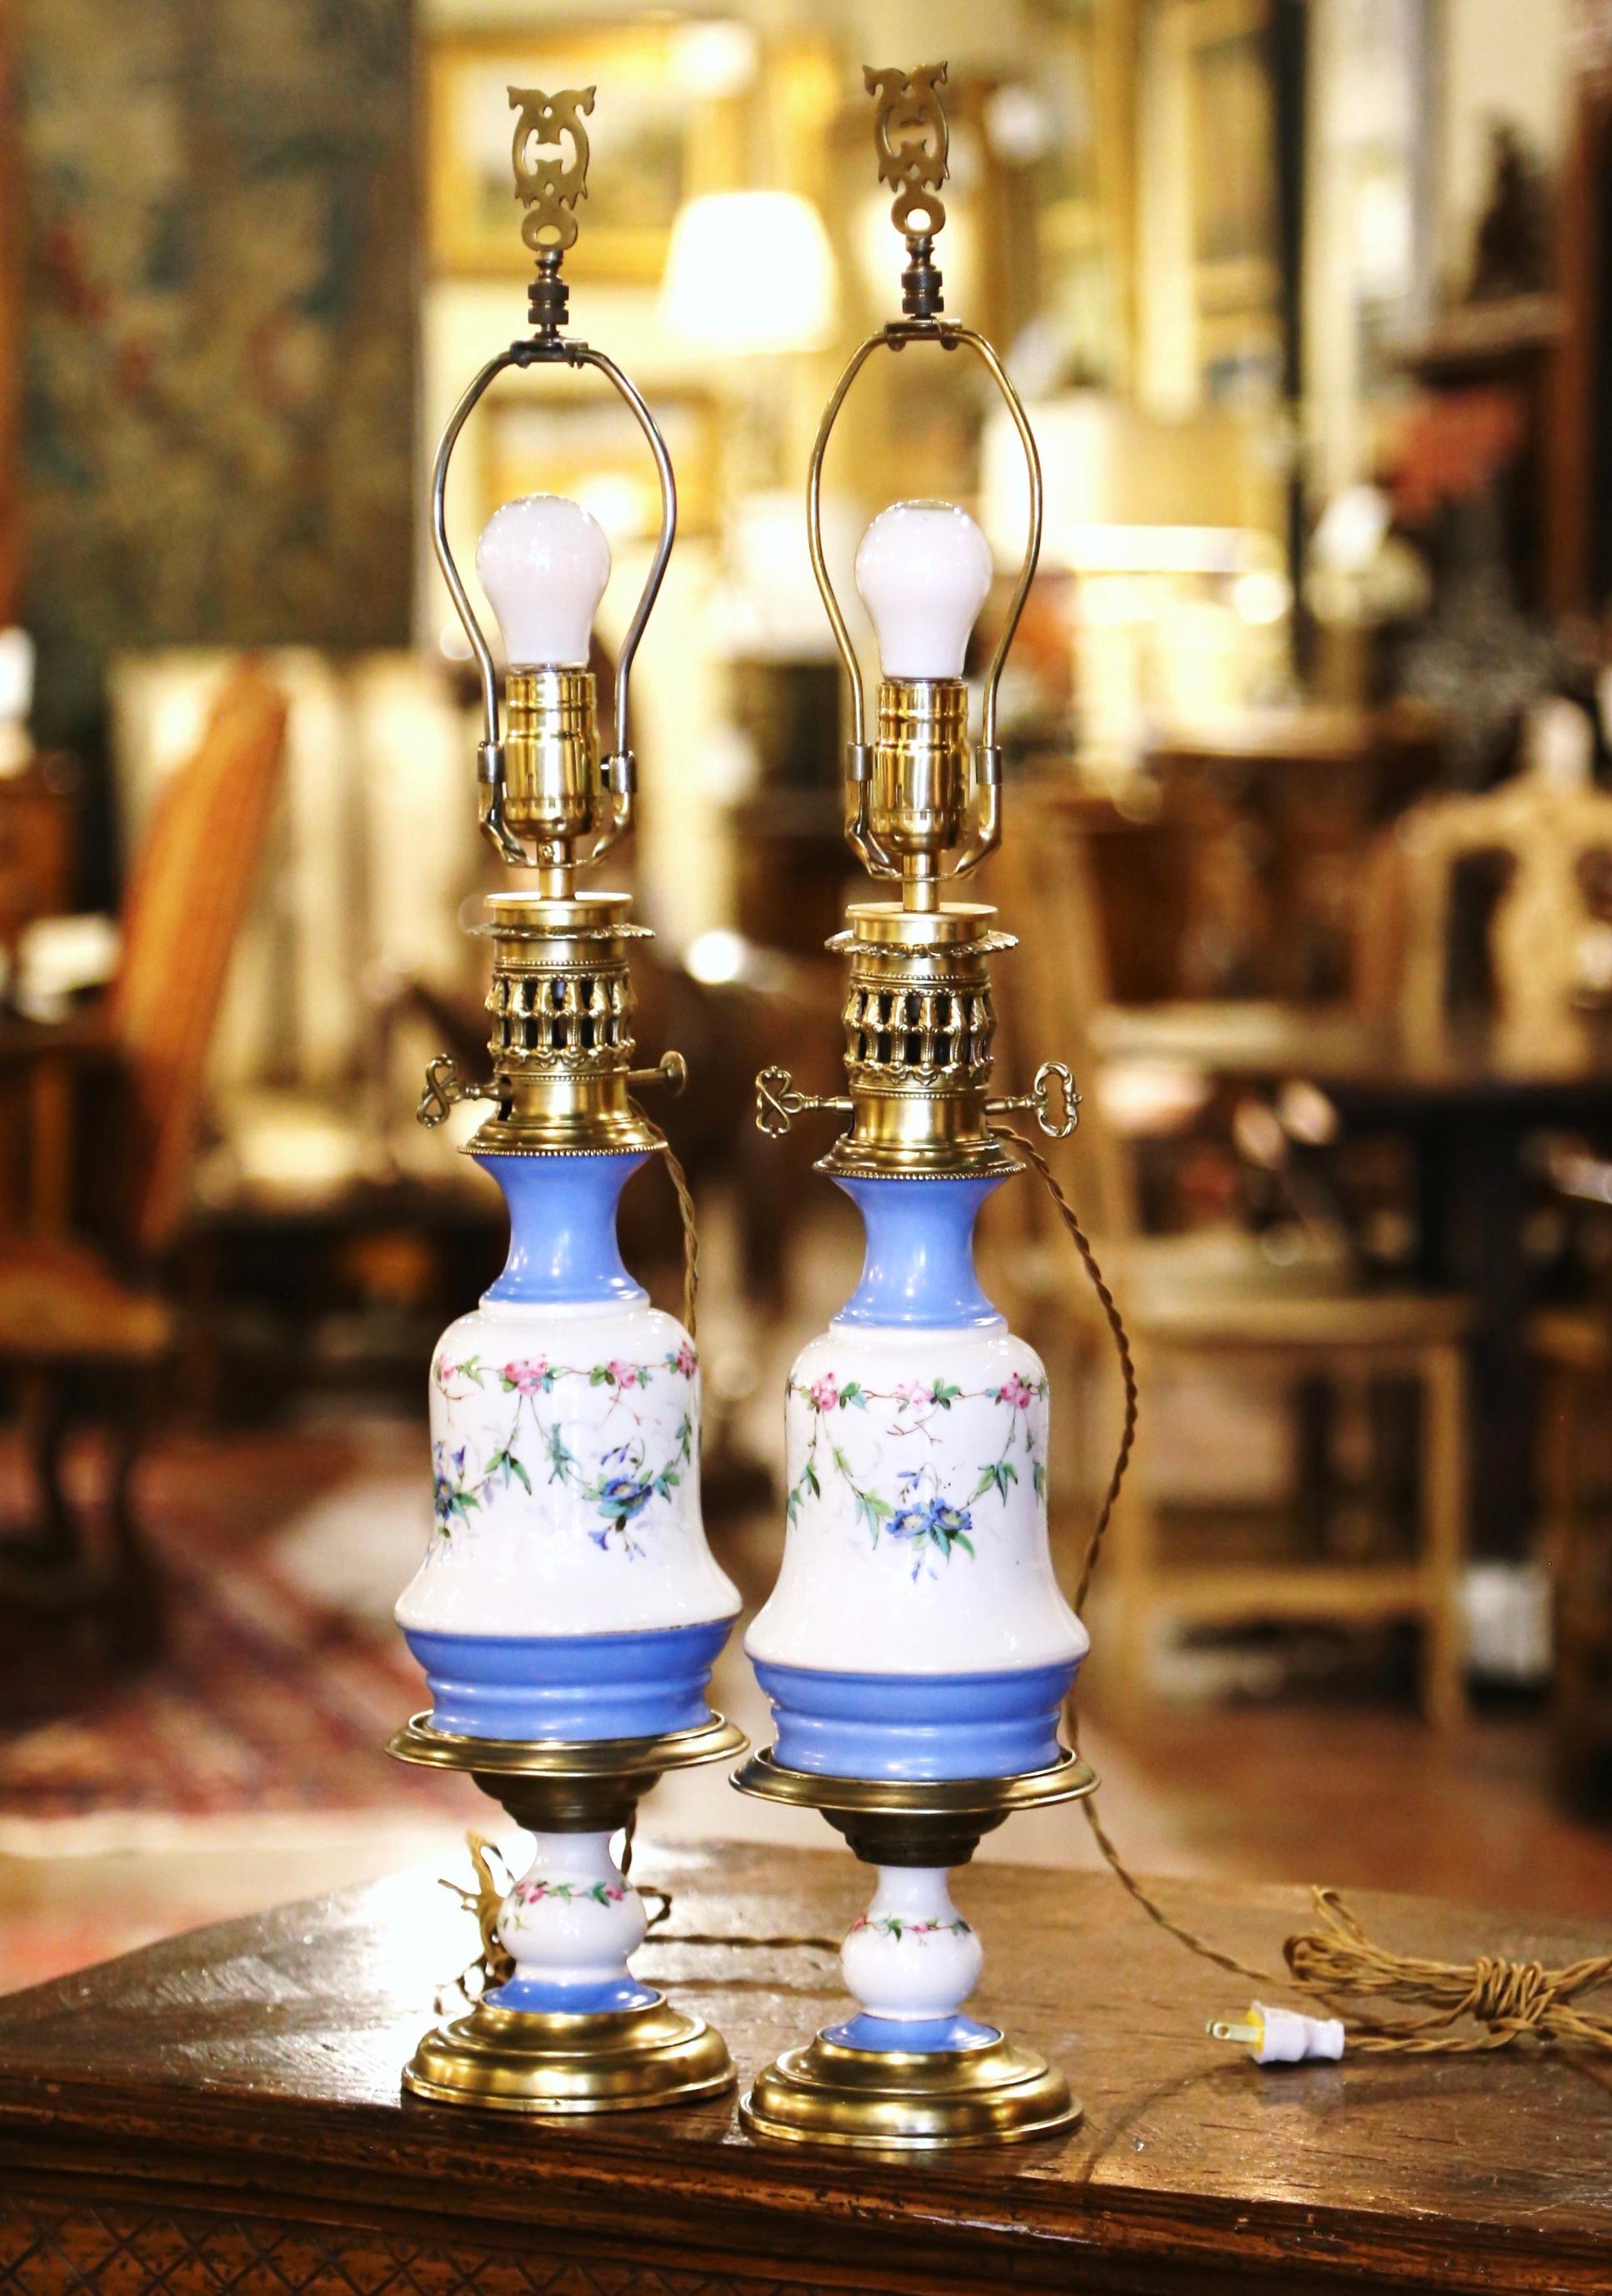 Pair of 19th Century French Porcelain & Brass Table Oil Lamps with Floral Motif For Sale 3